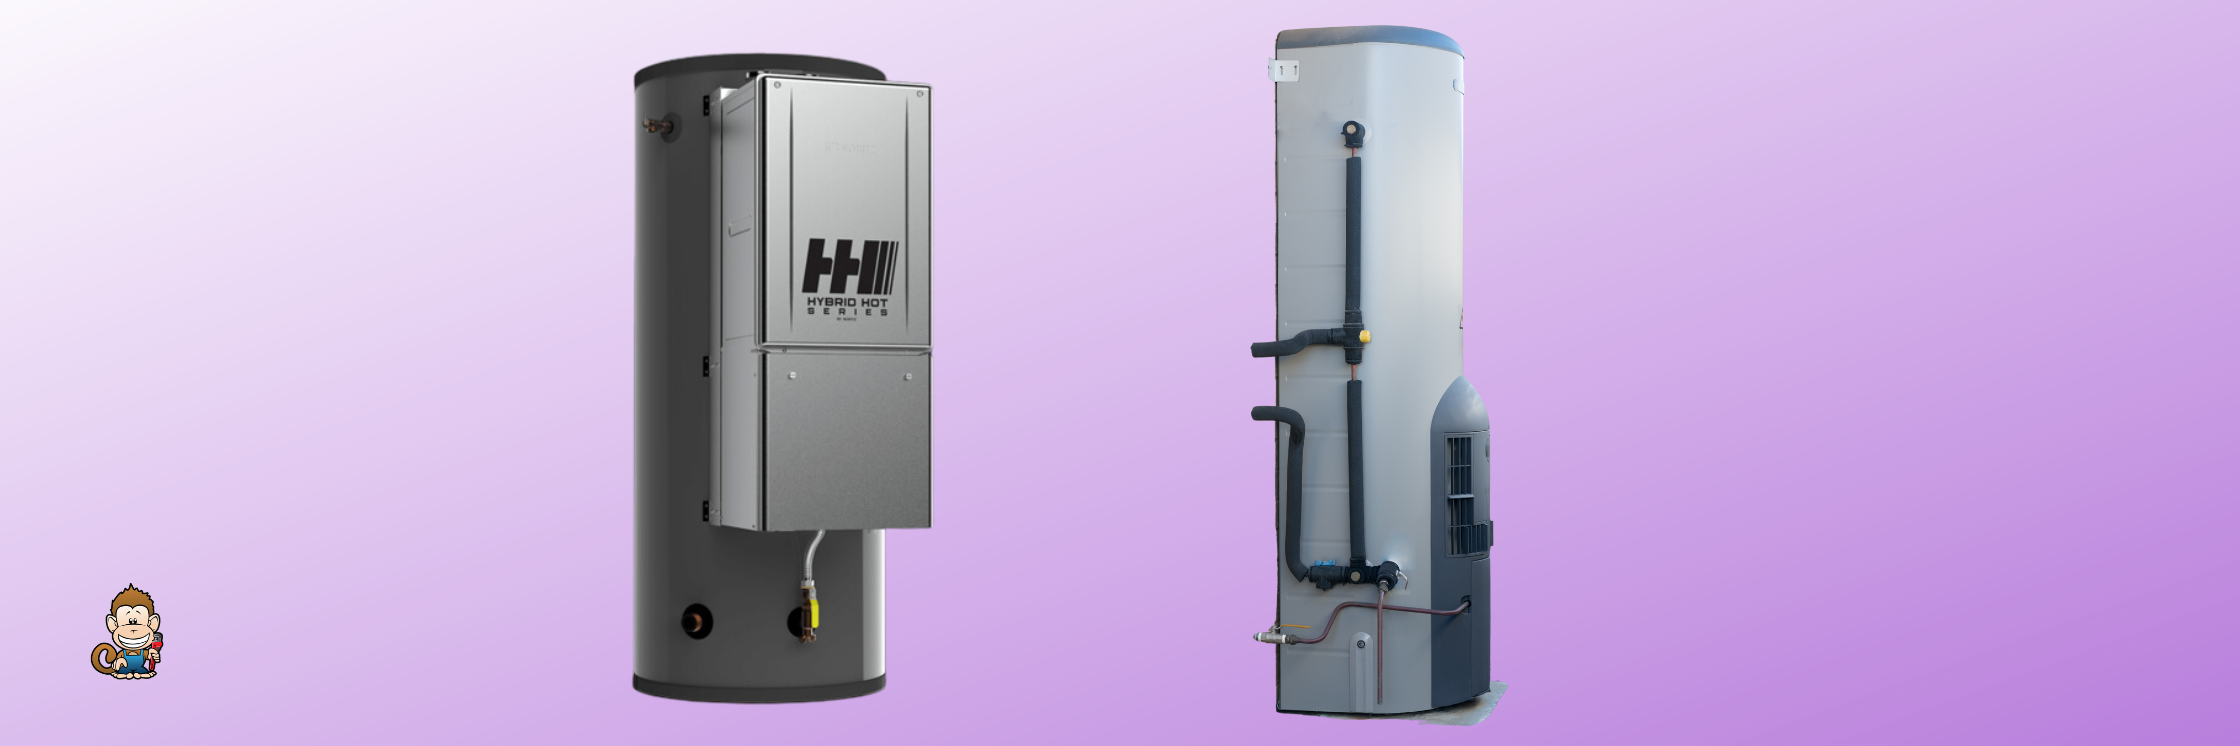 Difference Between Hybrid and Heat Pump Water Heaters